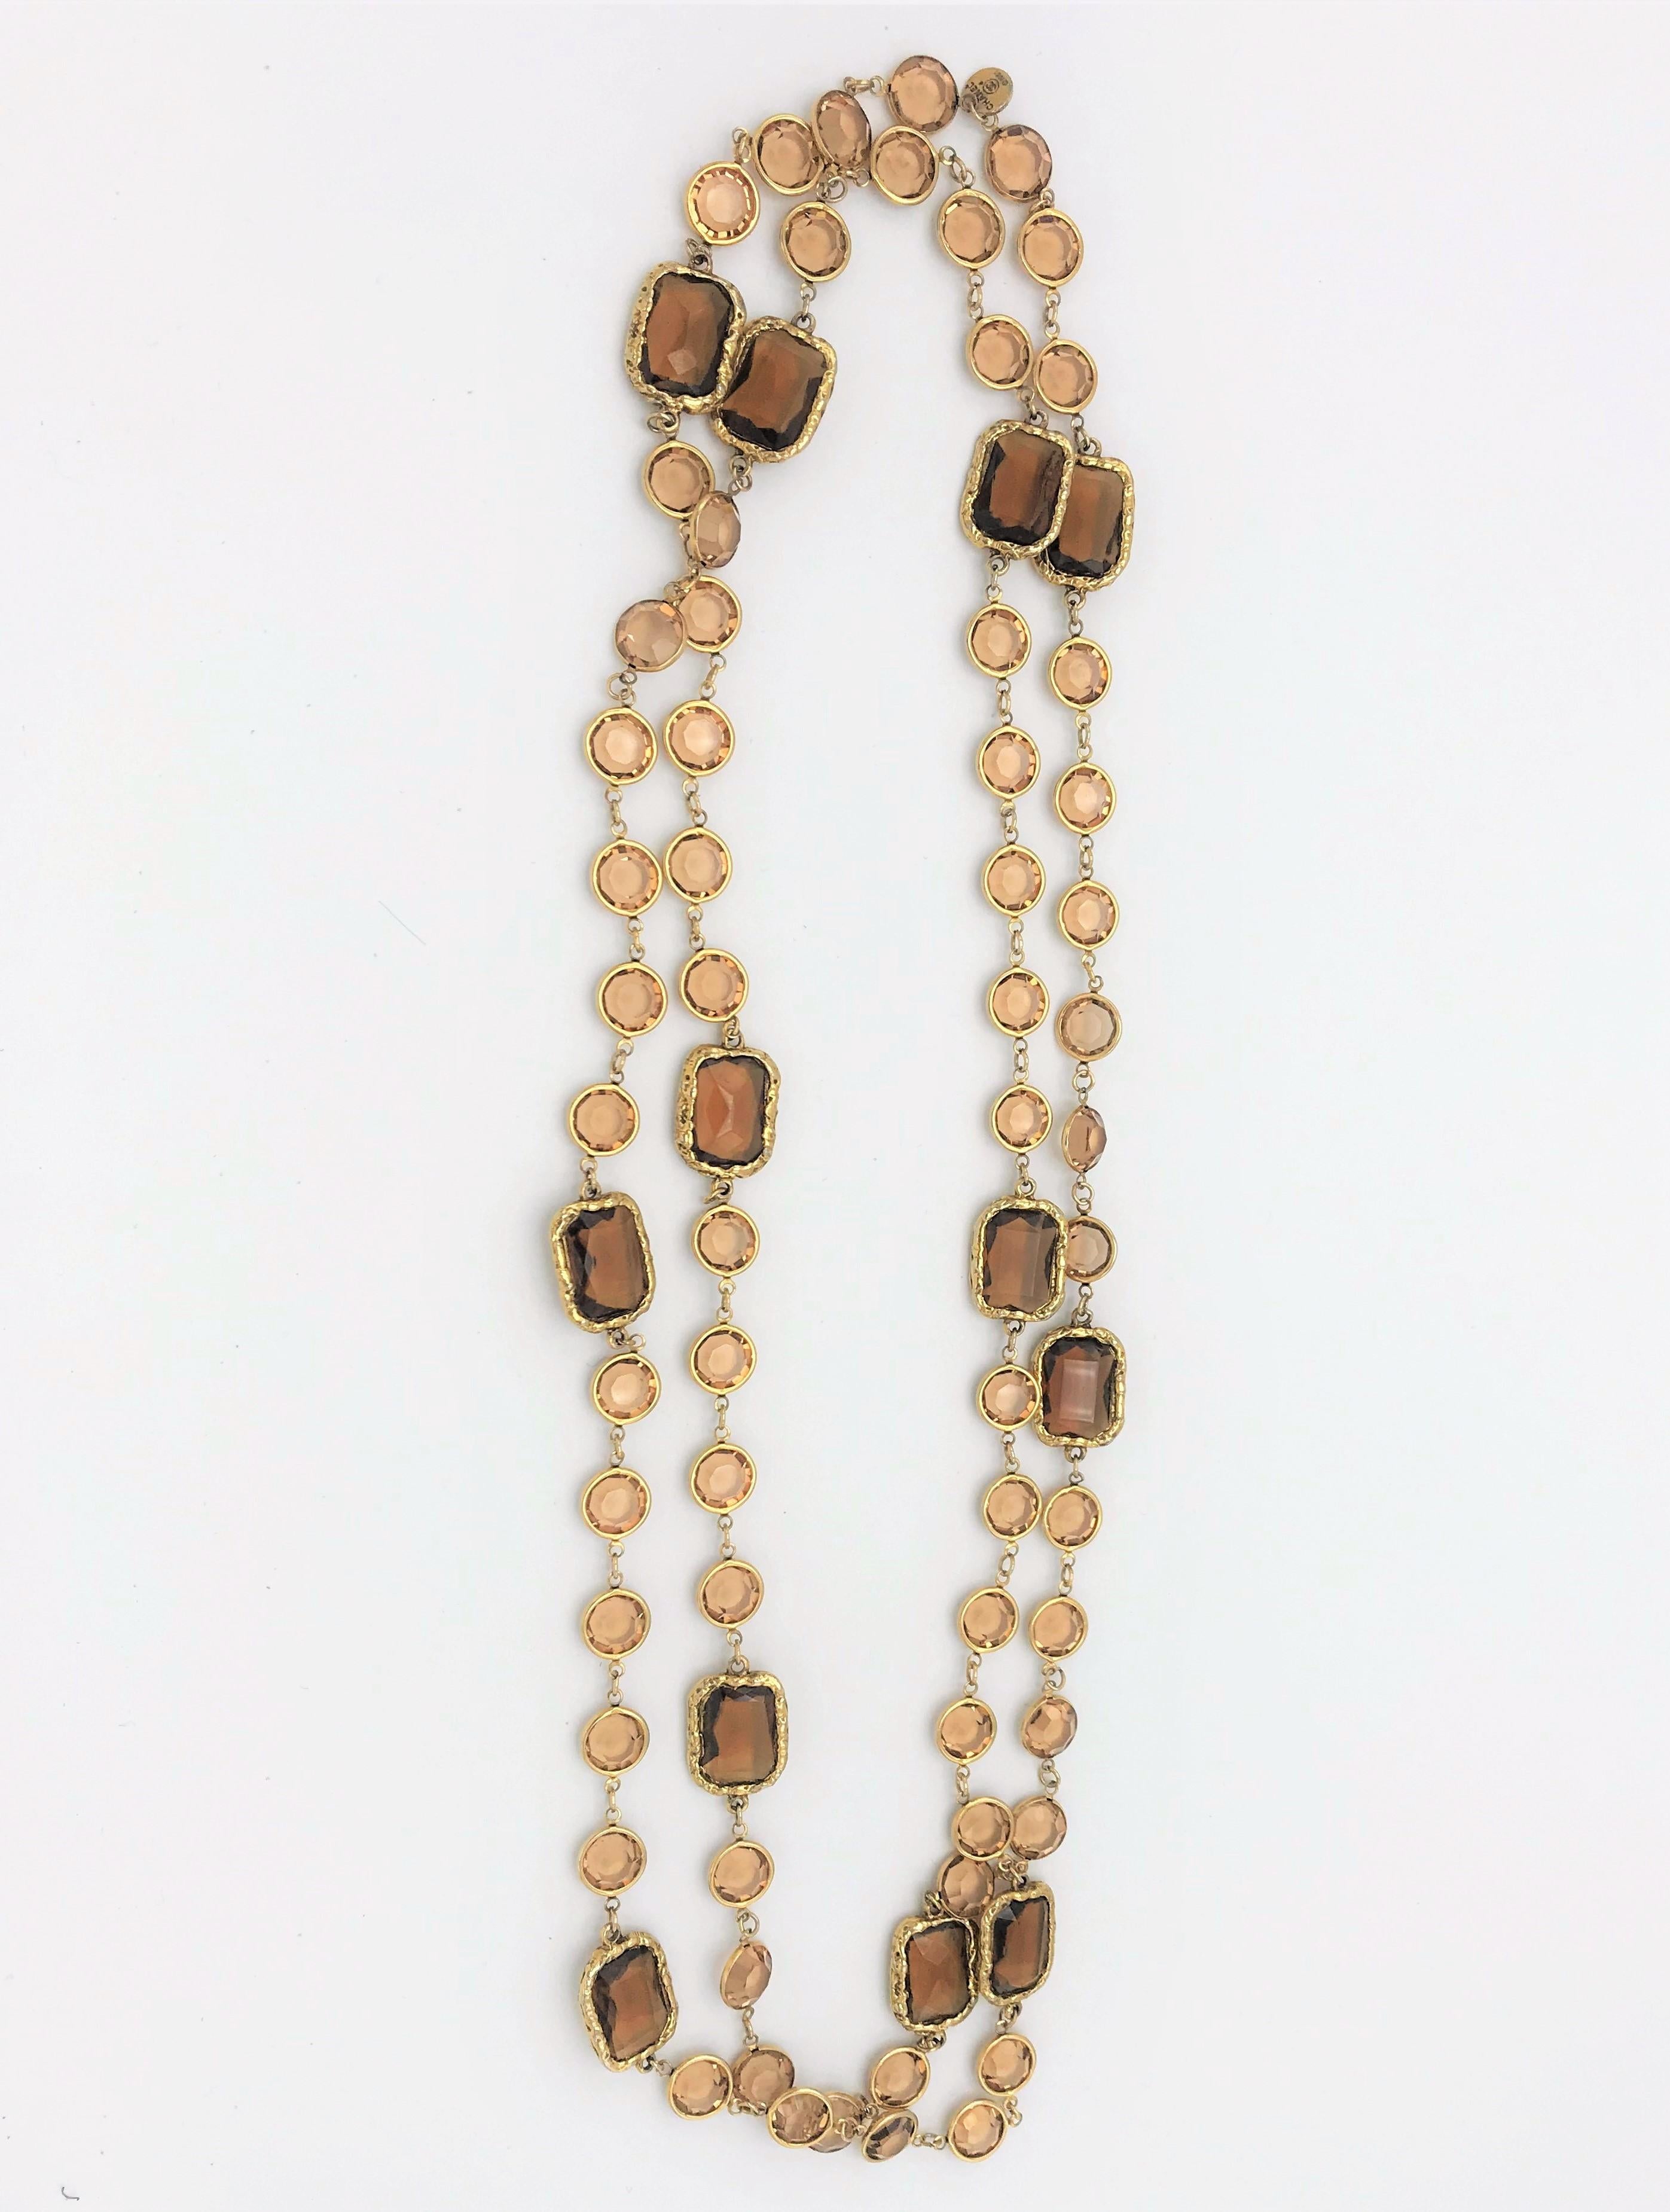 Mixed Cut Iconic Chanel Chicklet necklace, 12 cut rhinestones brown, 152 cm long, France 